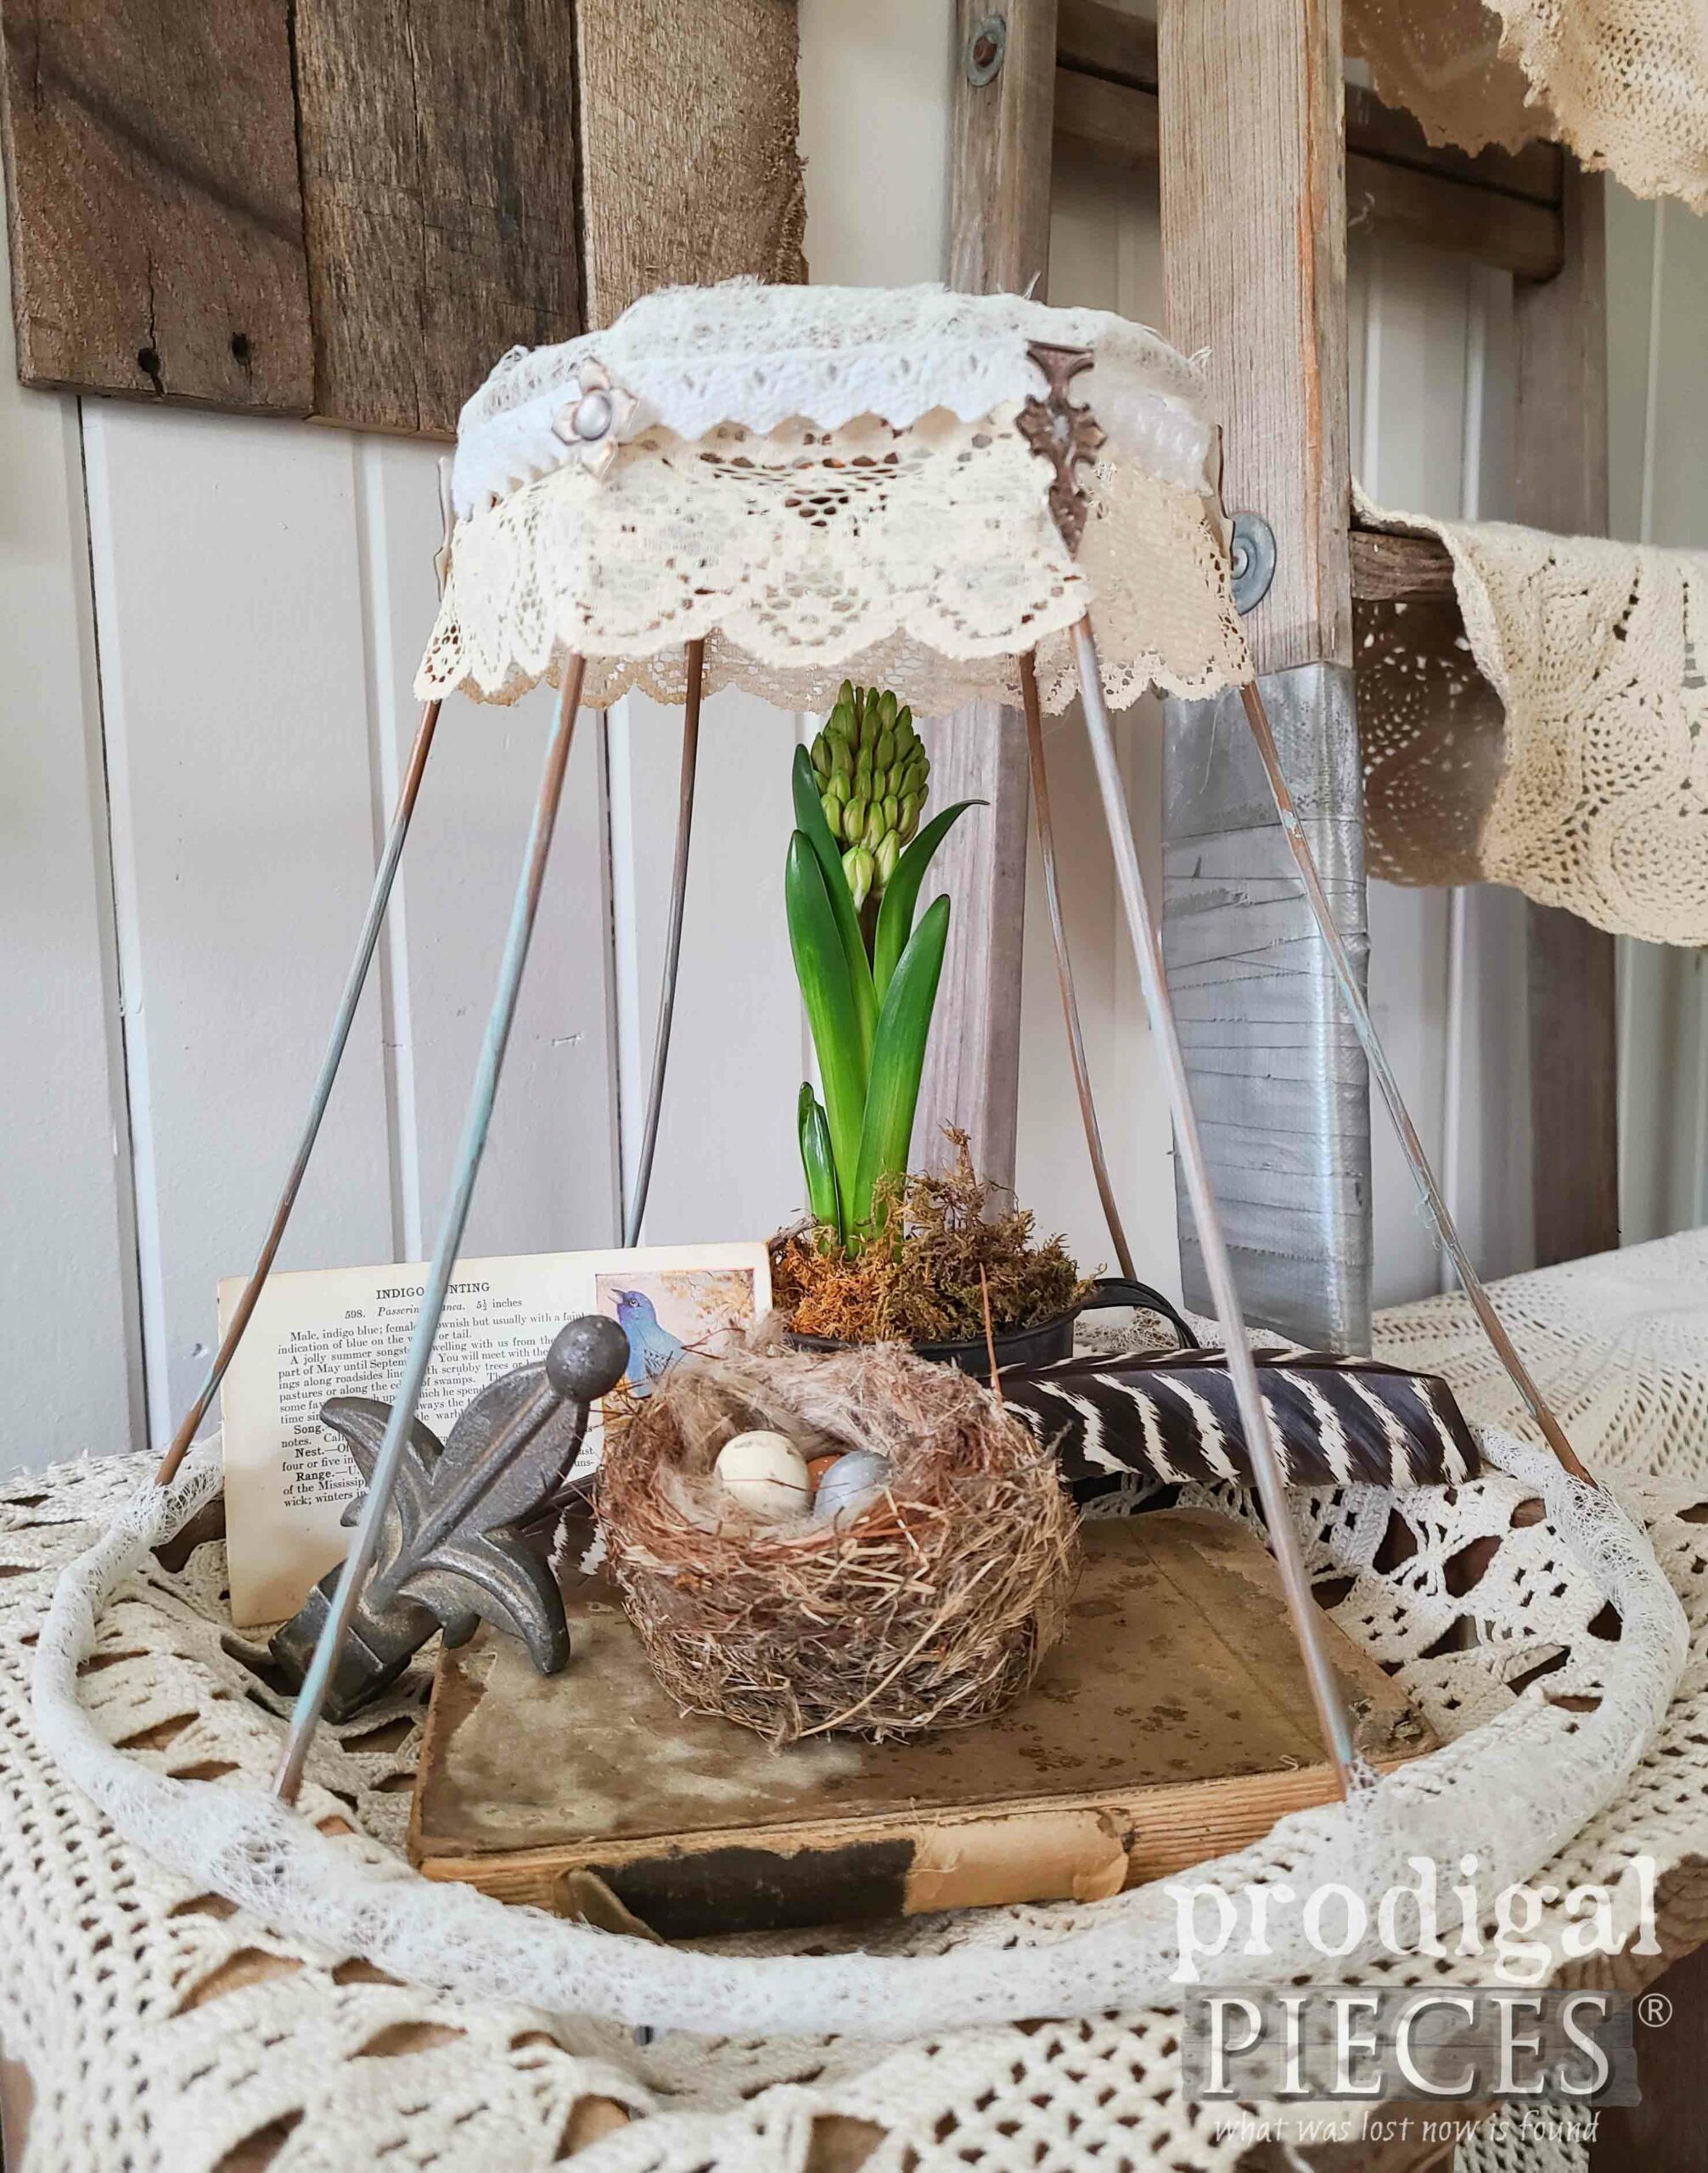 DIY Lampshade Cloche from Thrifted Find by Larissa of Prodigal Pieces | prodigalpieces.com #prodigalpieces #farmhouse #diy #upcycled